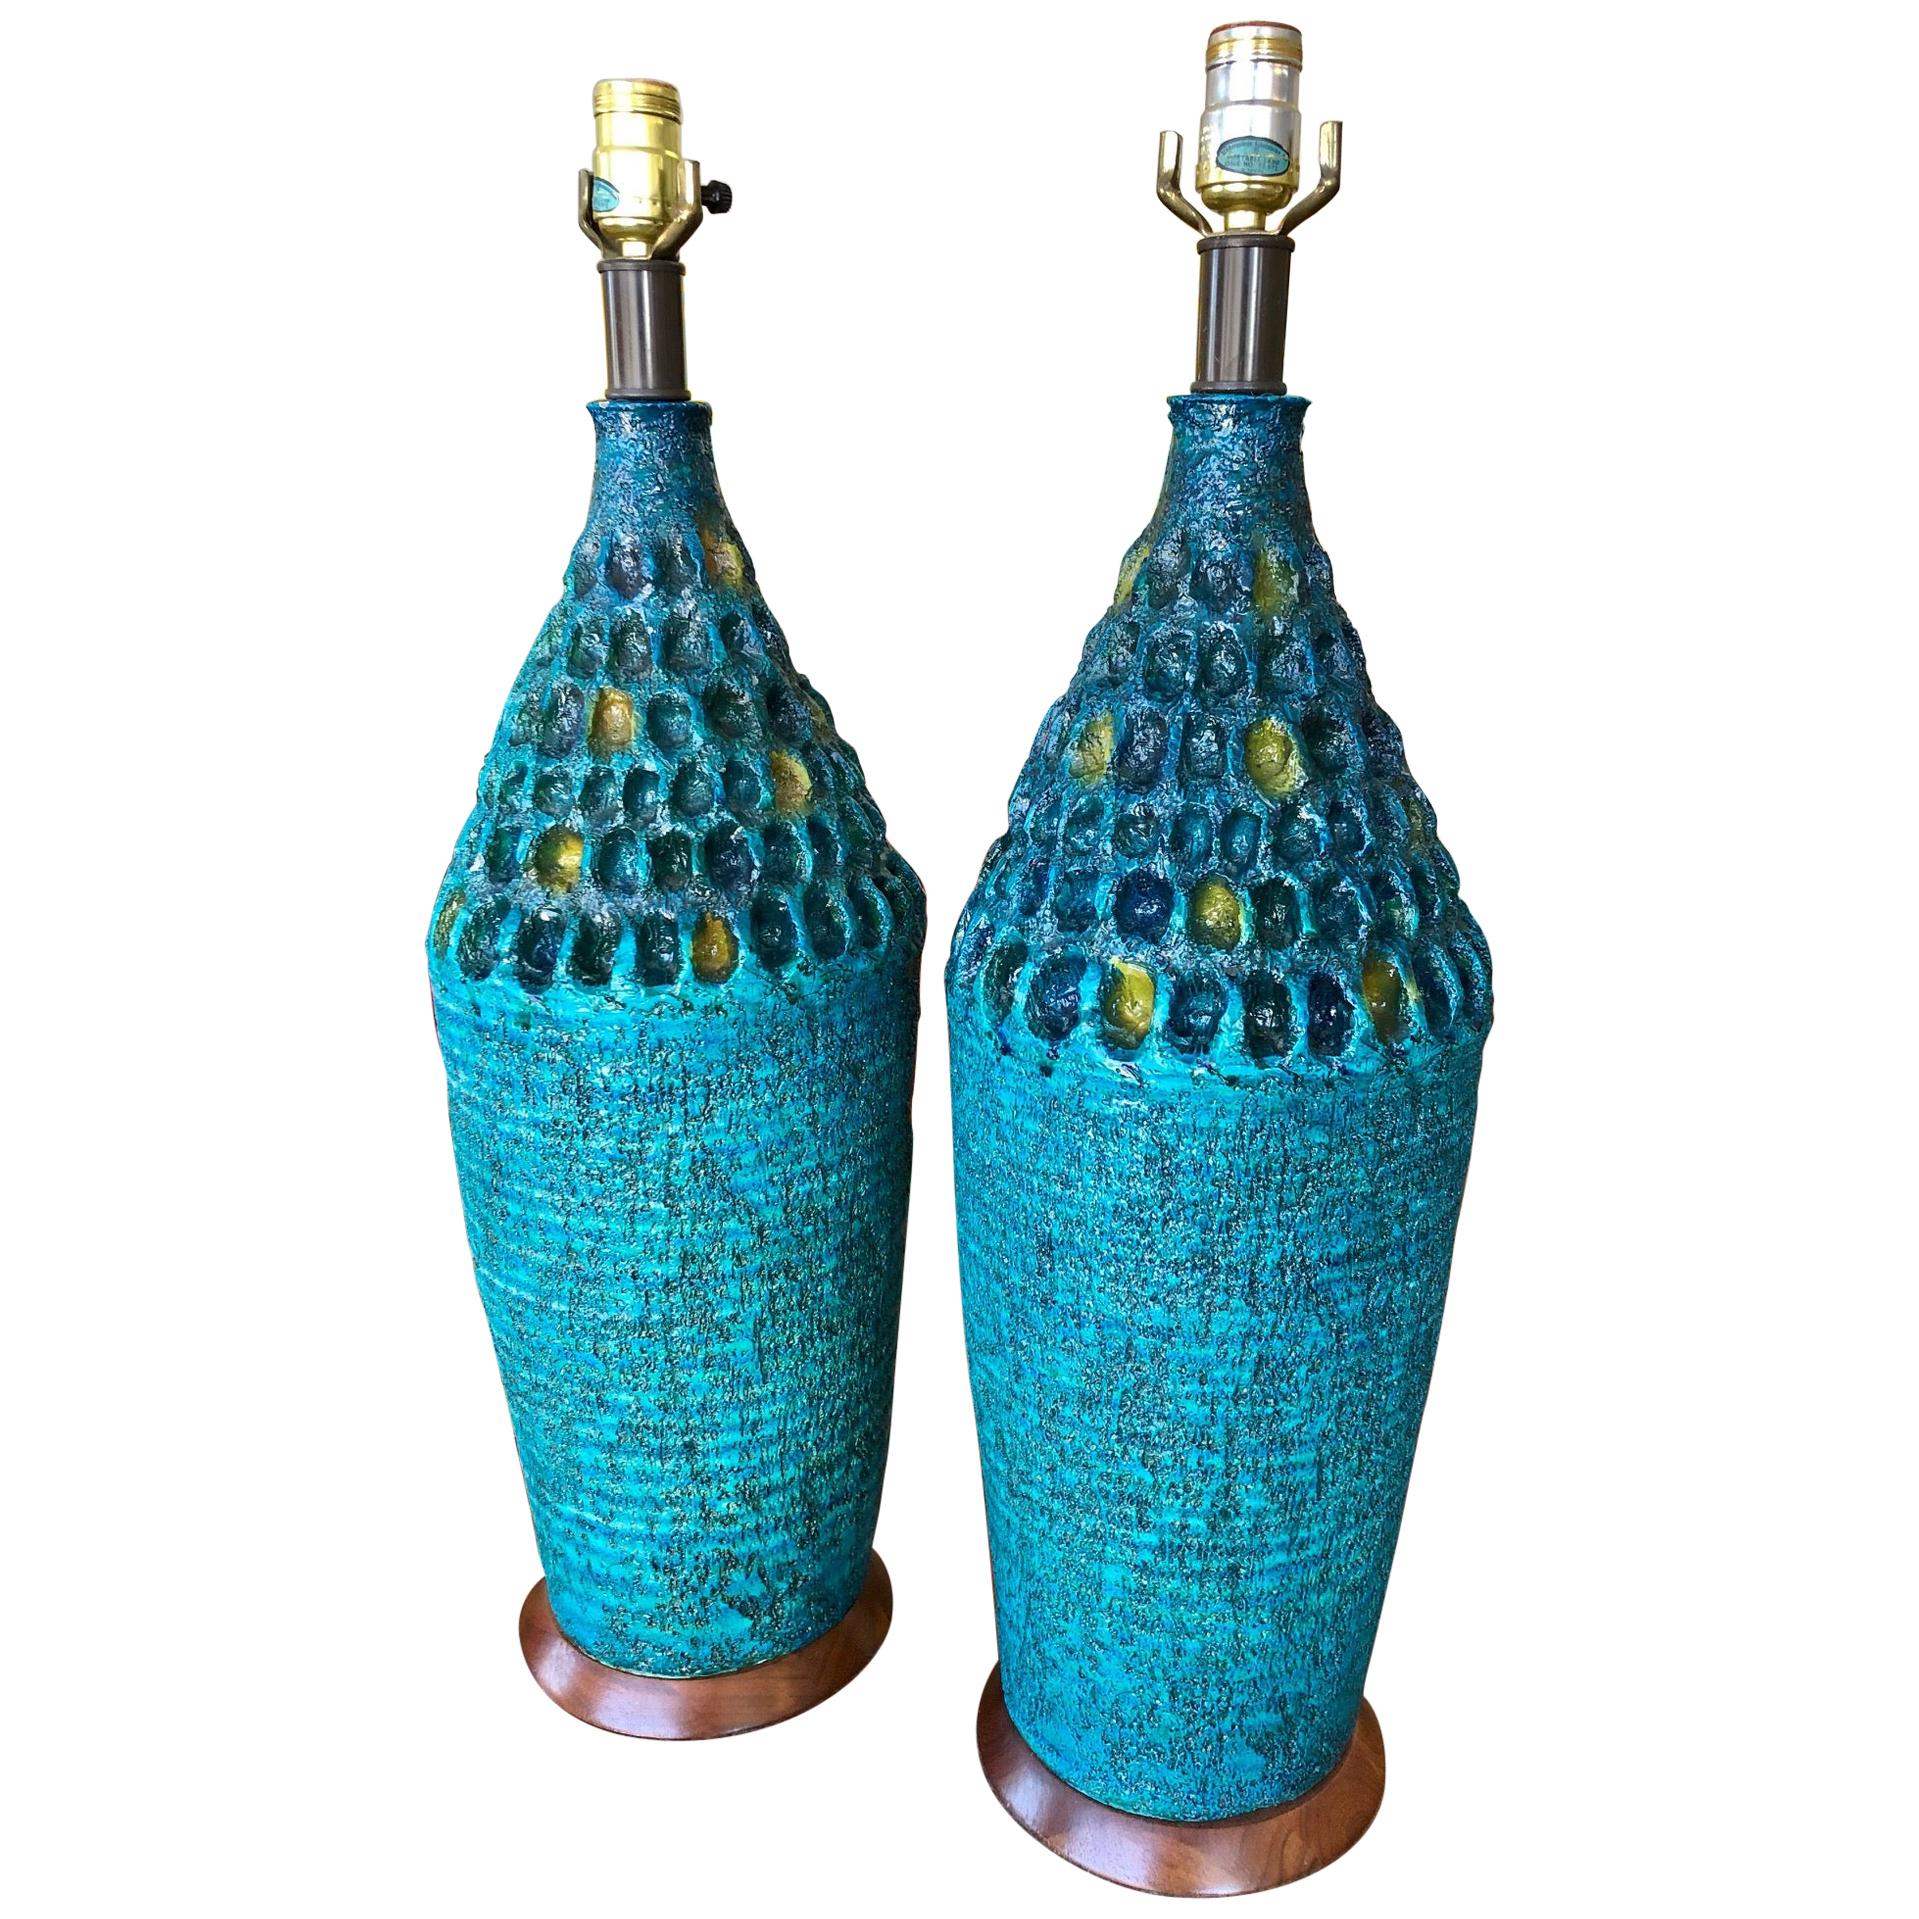 Vintage 1960s Pair of Large Turquoise Ceramic Table Lamps